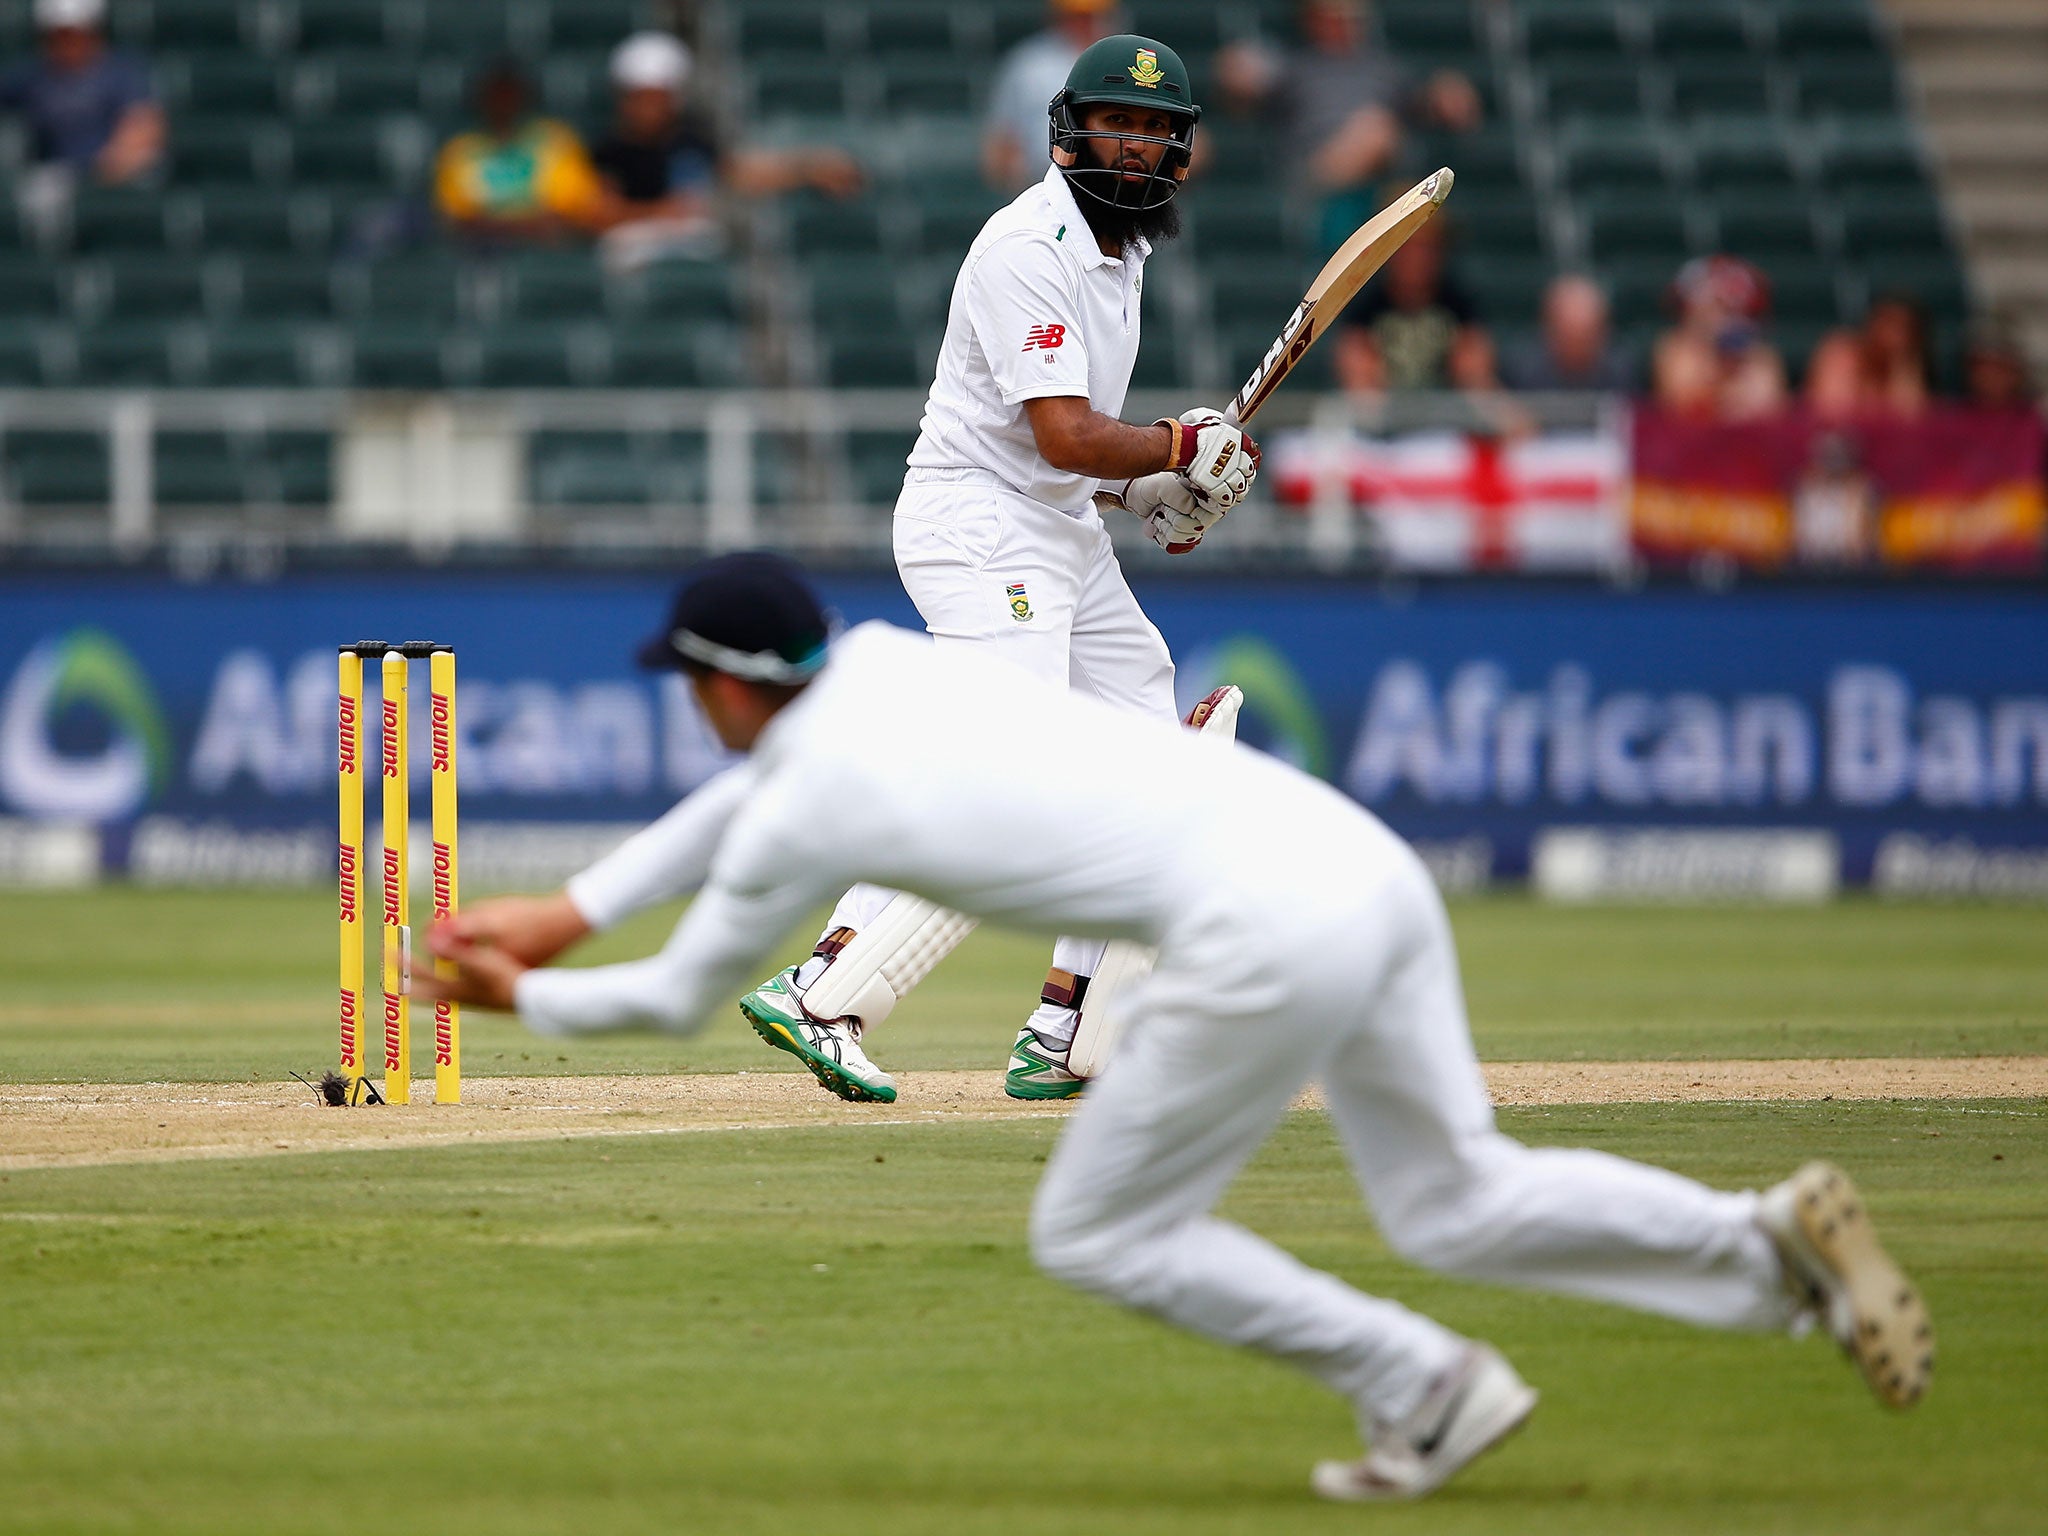 Hasim Amla watches Alex Hales stop the ball from going beyond the slip cordon